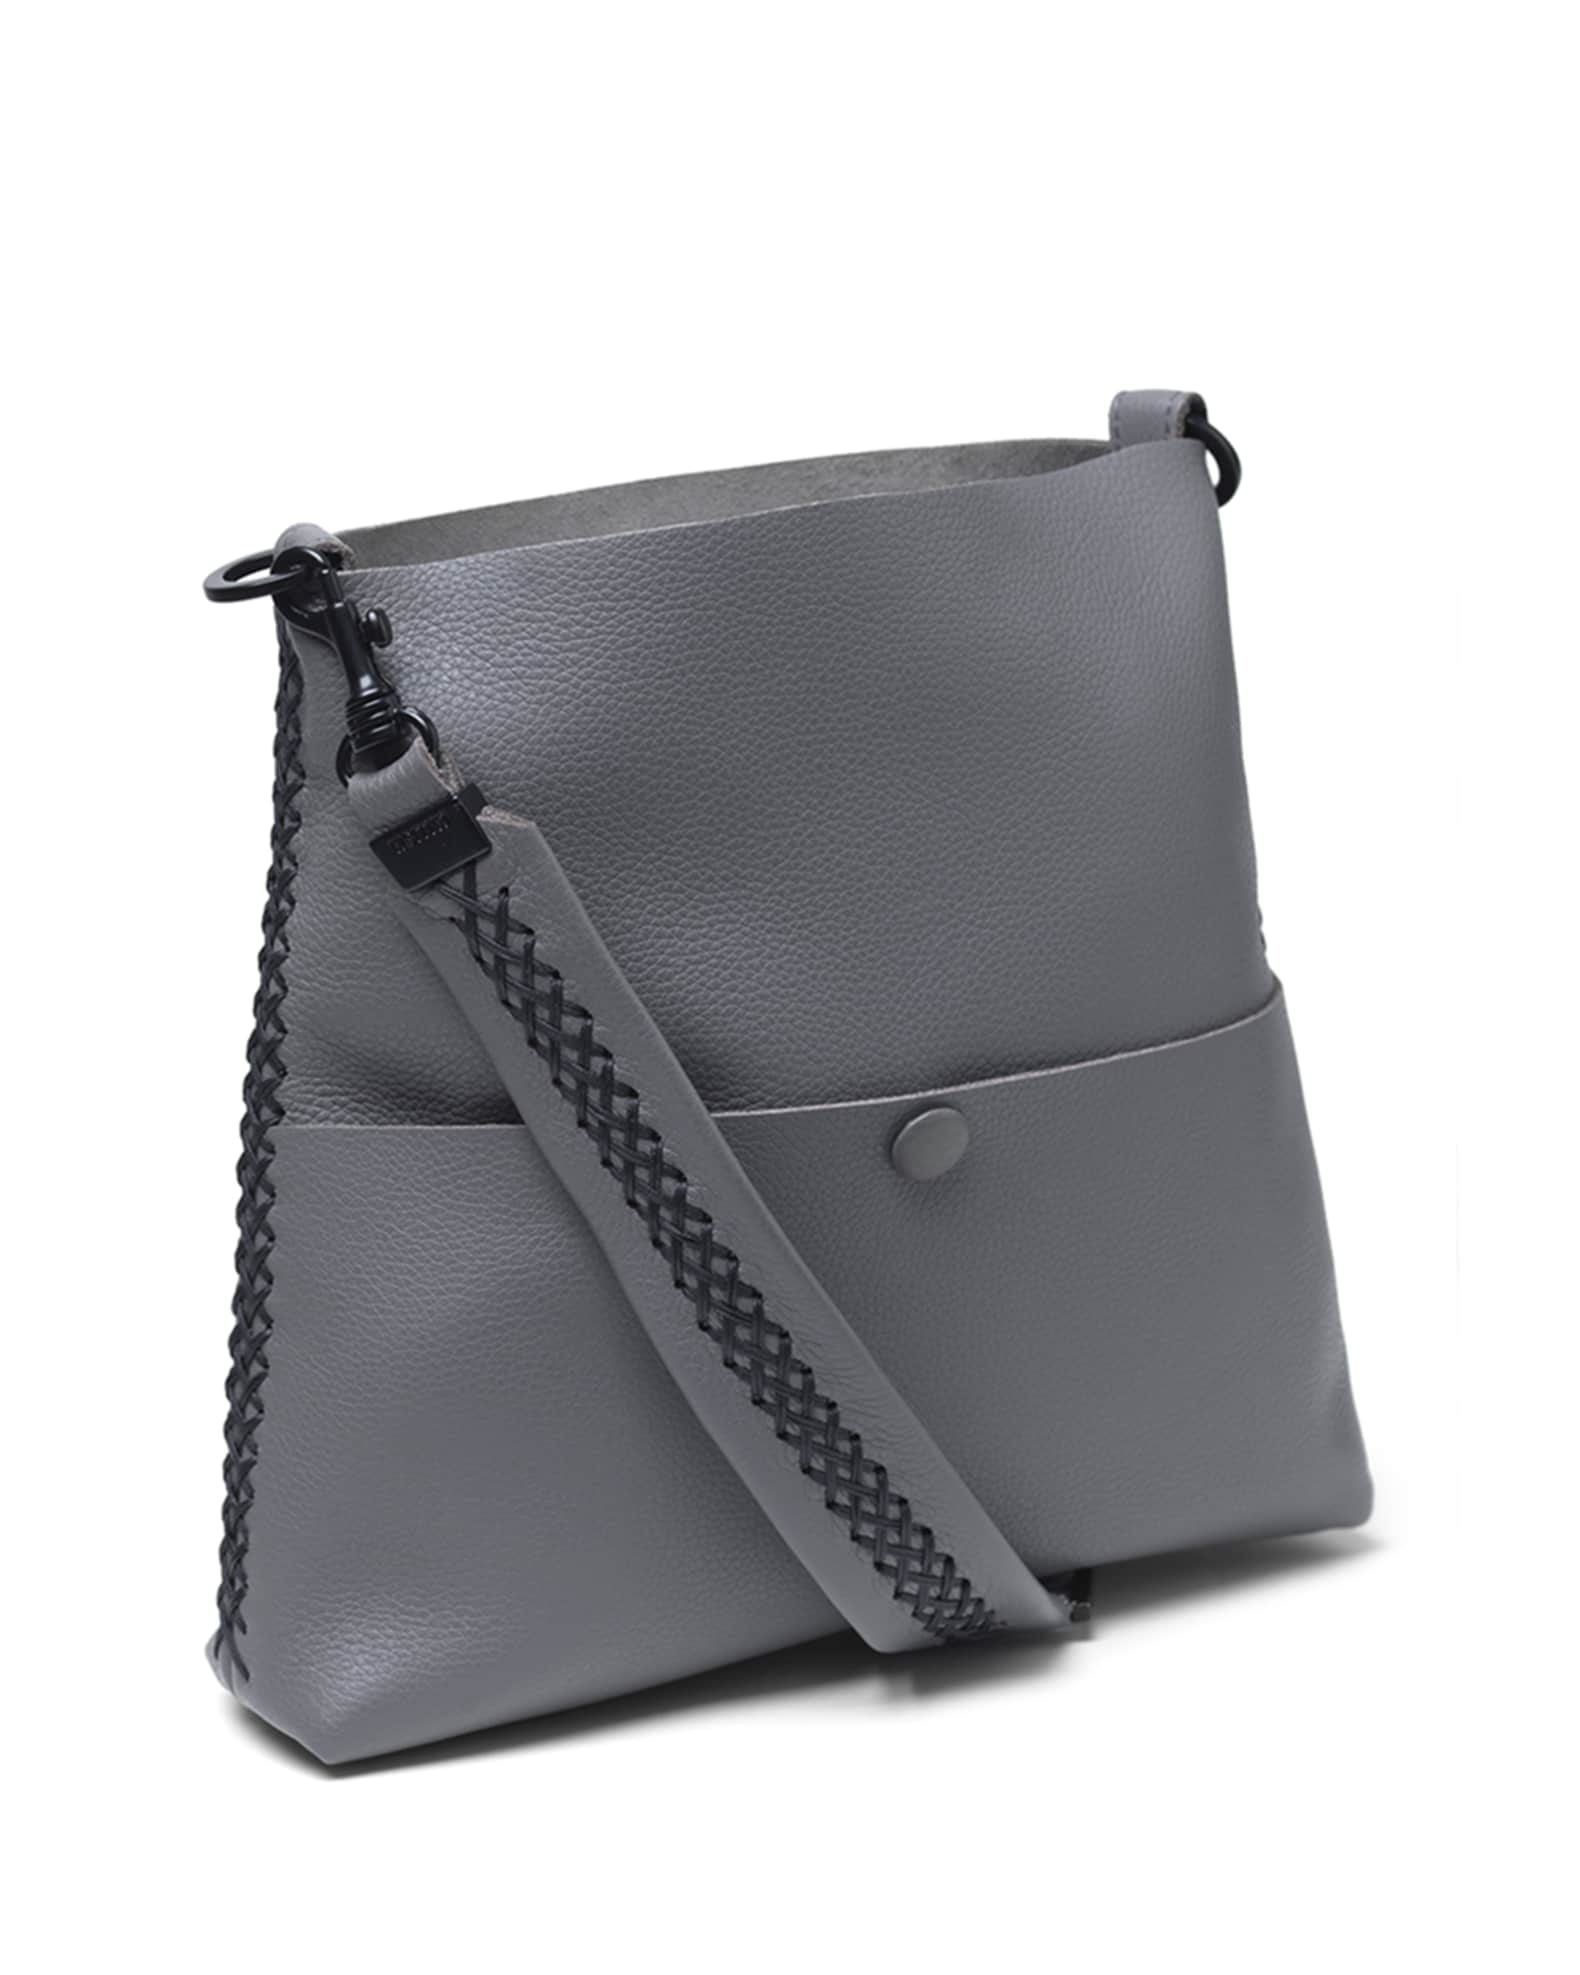 Givenchy Antigona Tote Glazed Small Black in Leather with Silver-Tone - US